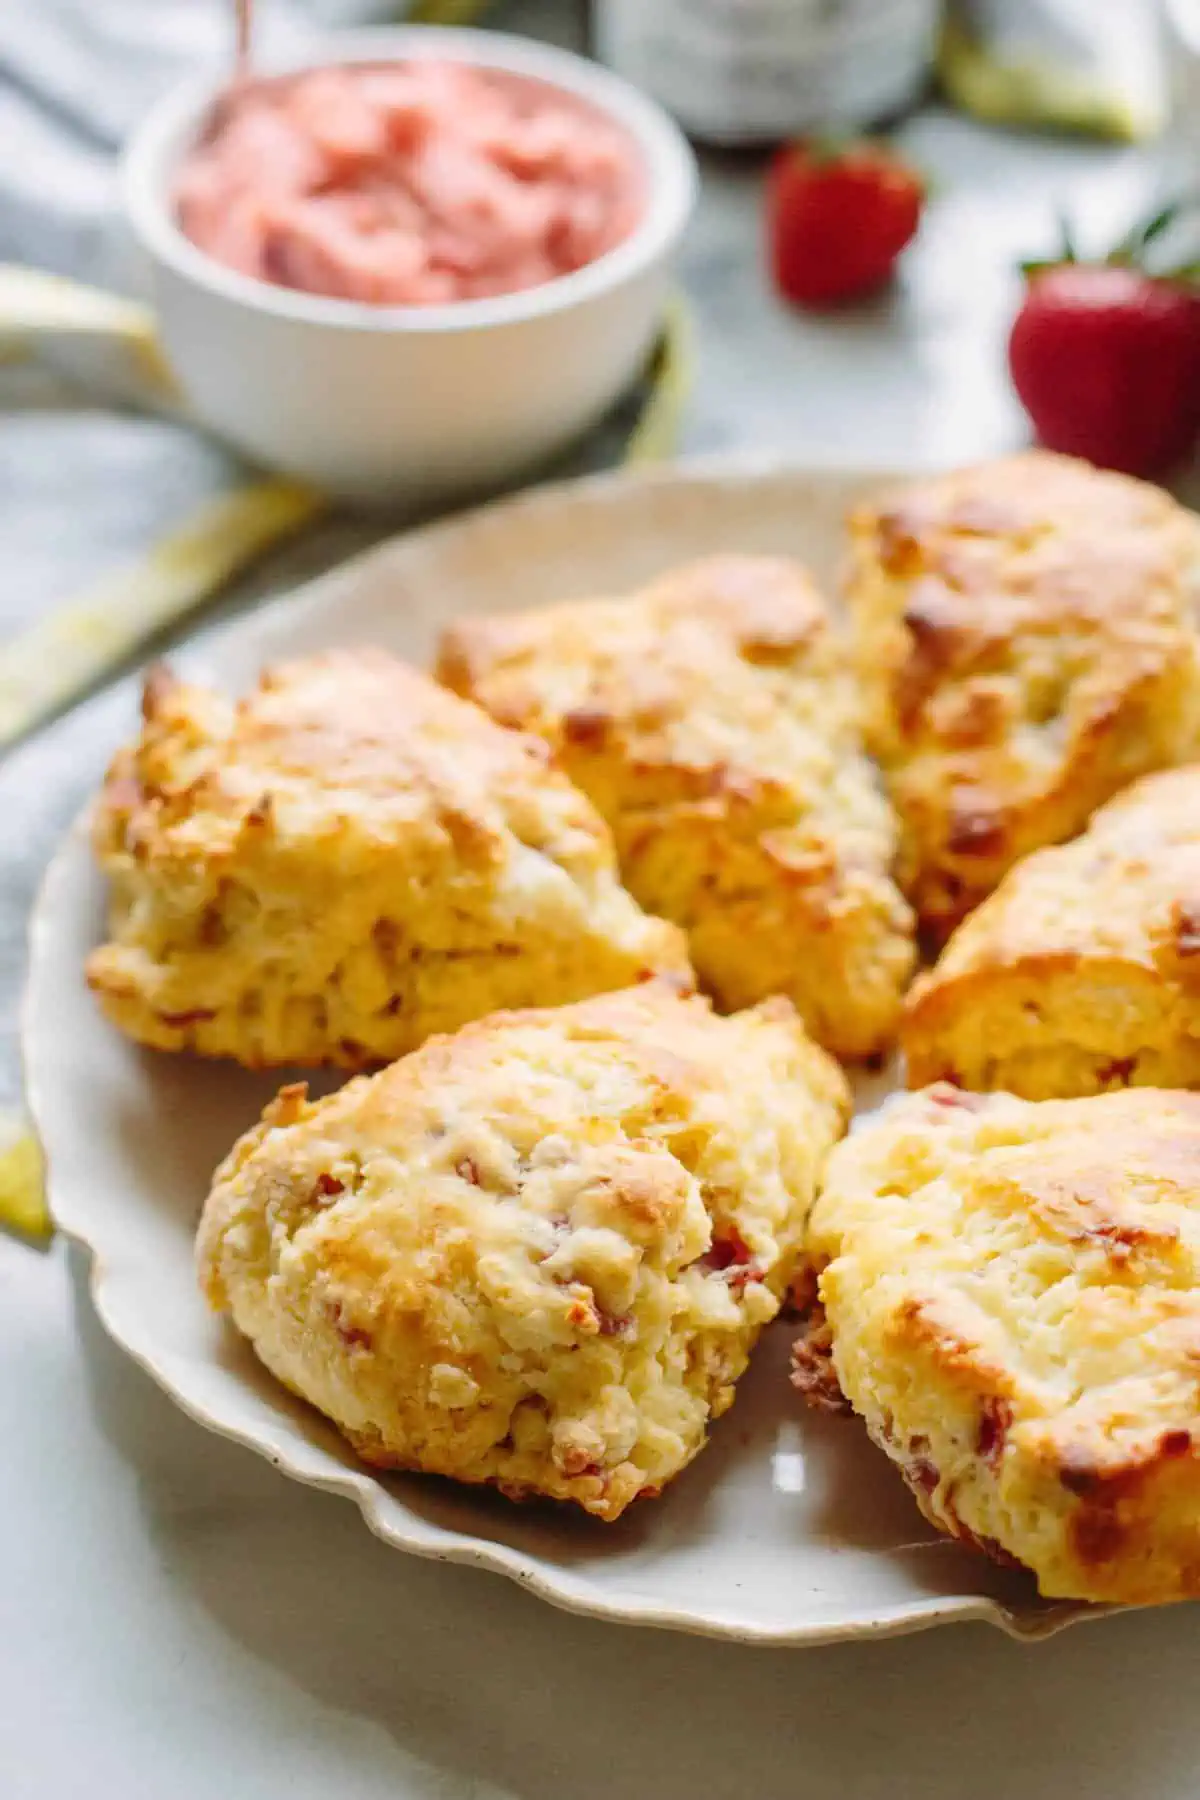 Prosciutto goat cheese scones arranged in a full circle on a white plate.